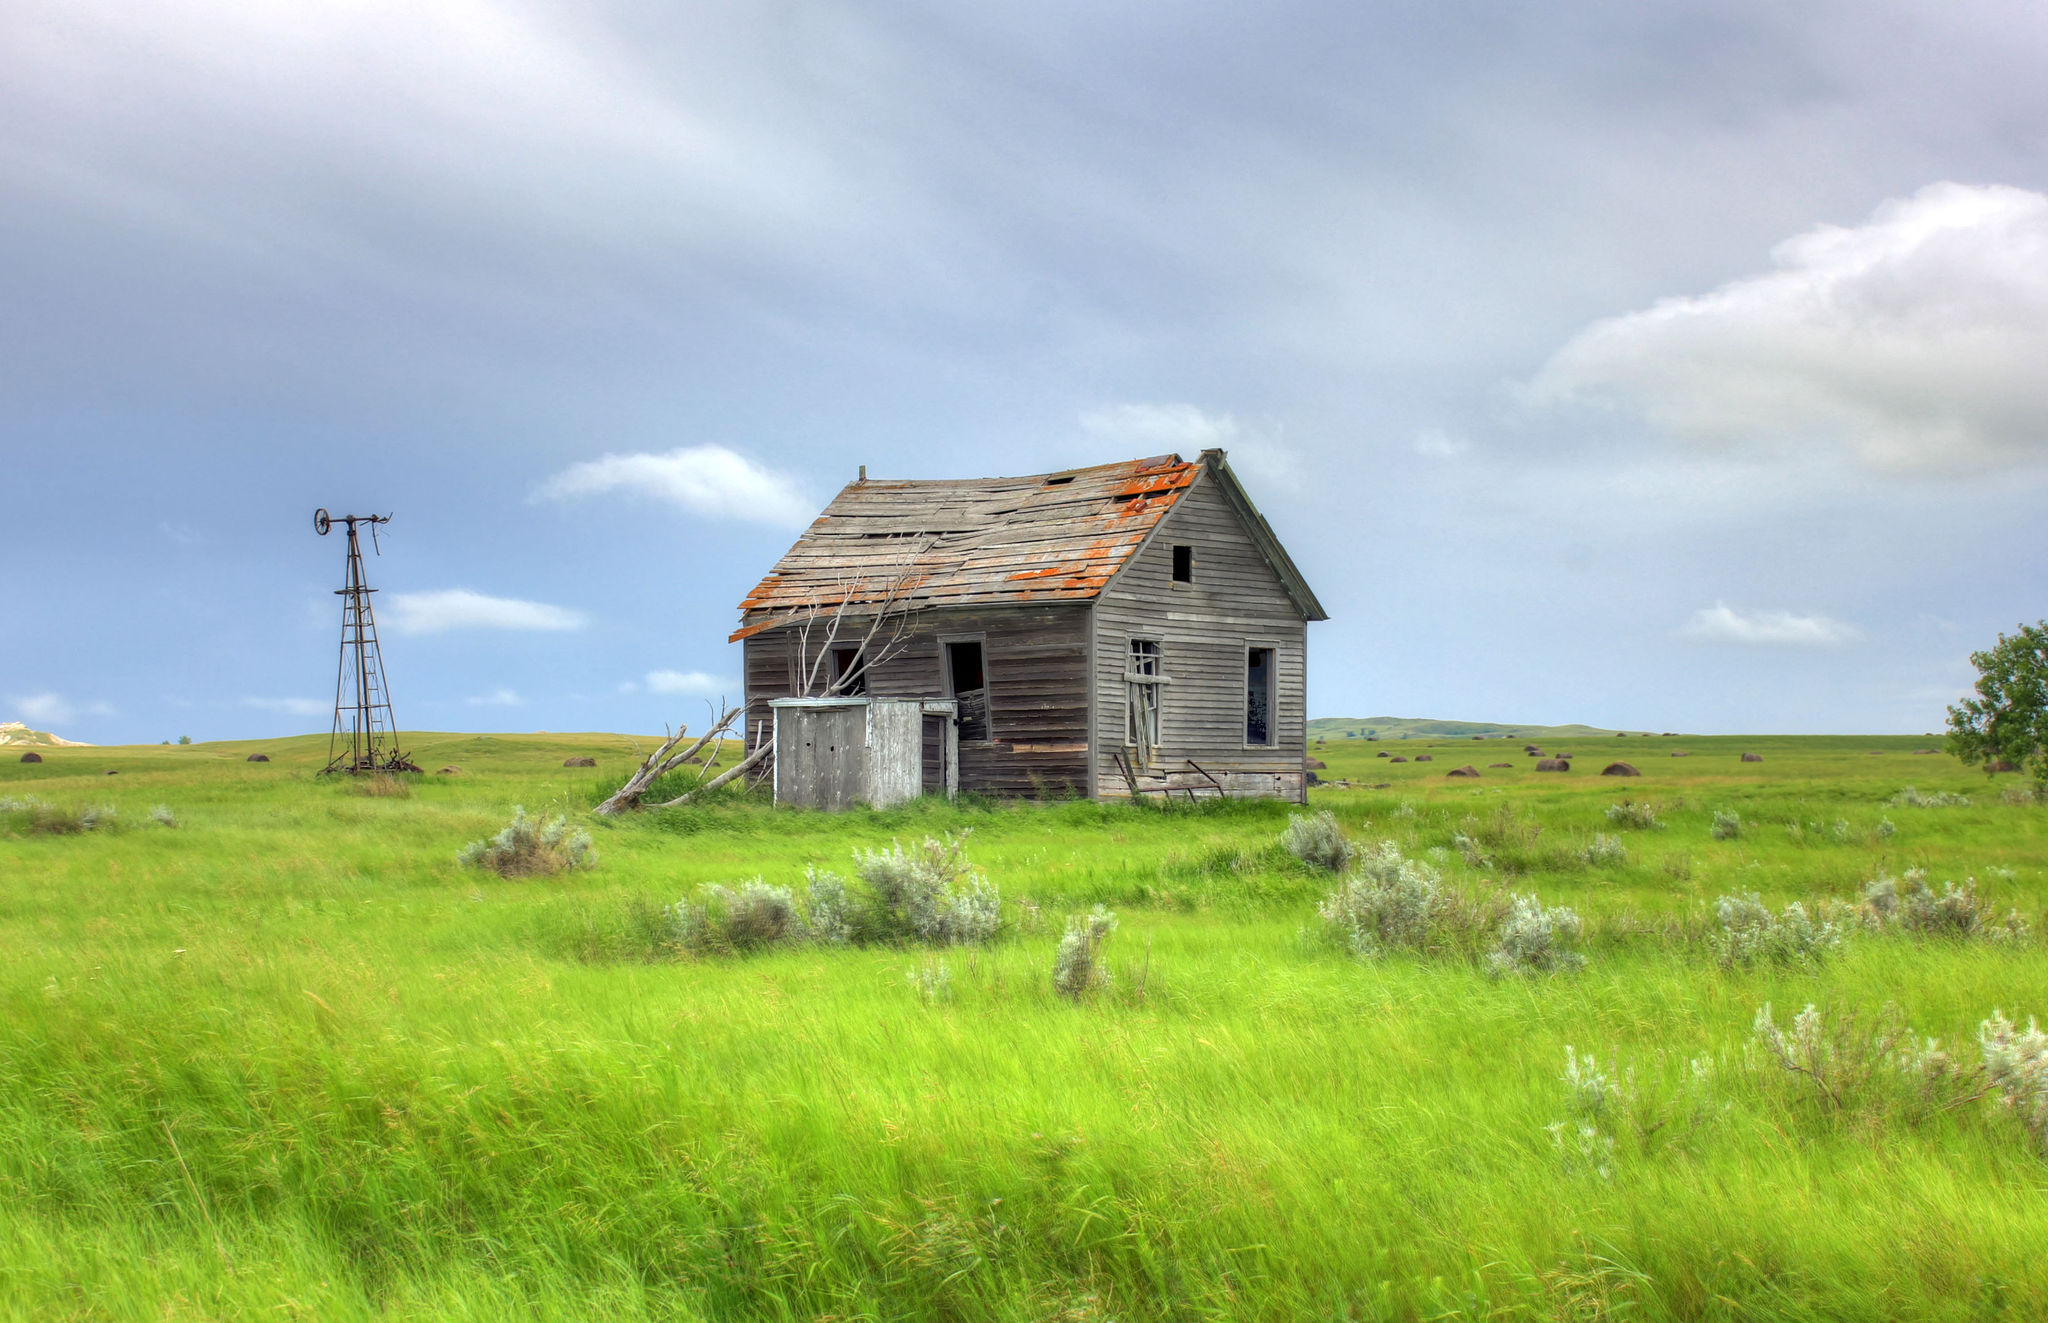 An old house on the grasslands in White Butte, North Dakota.